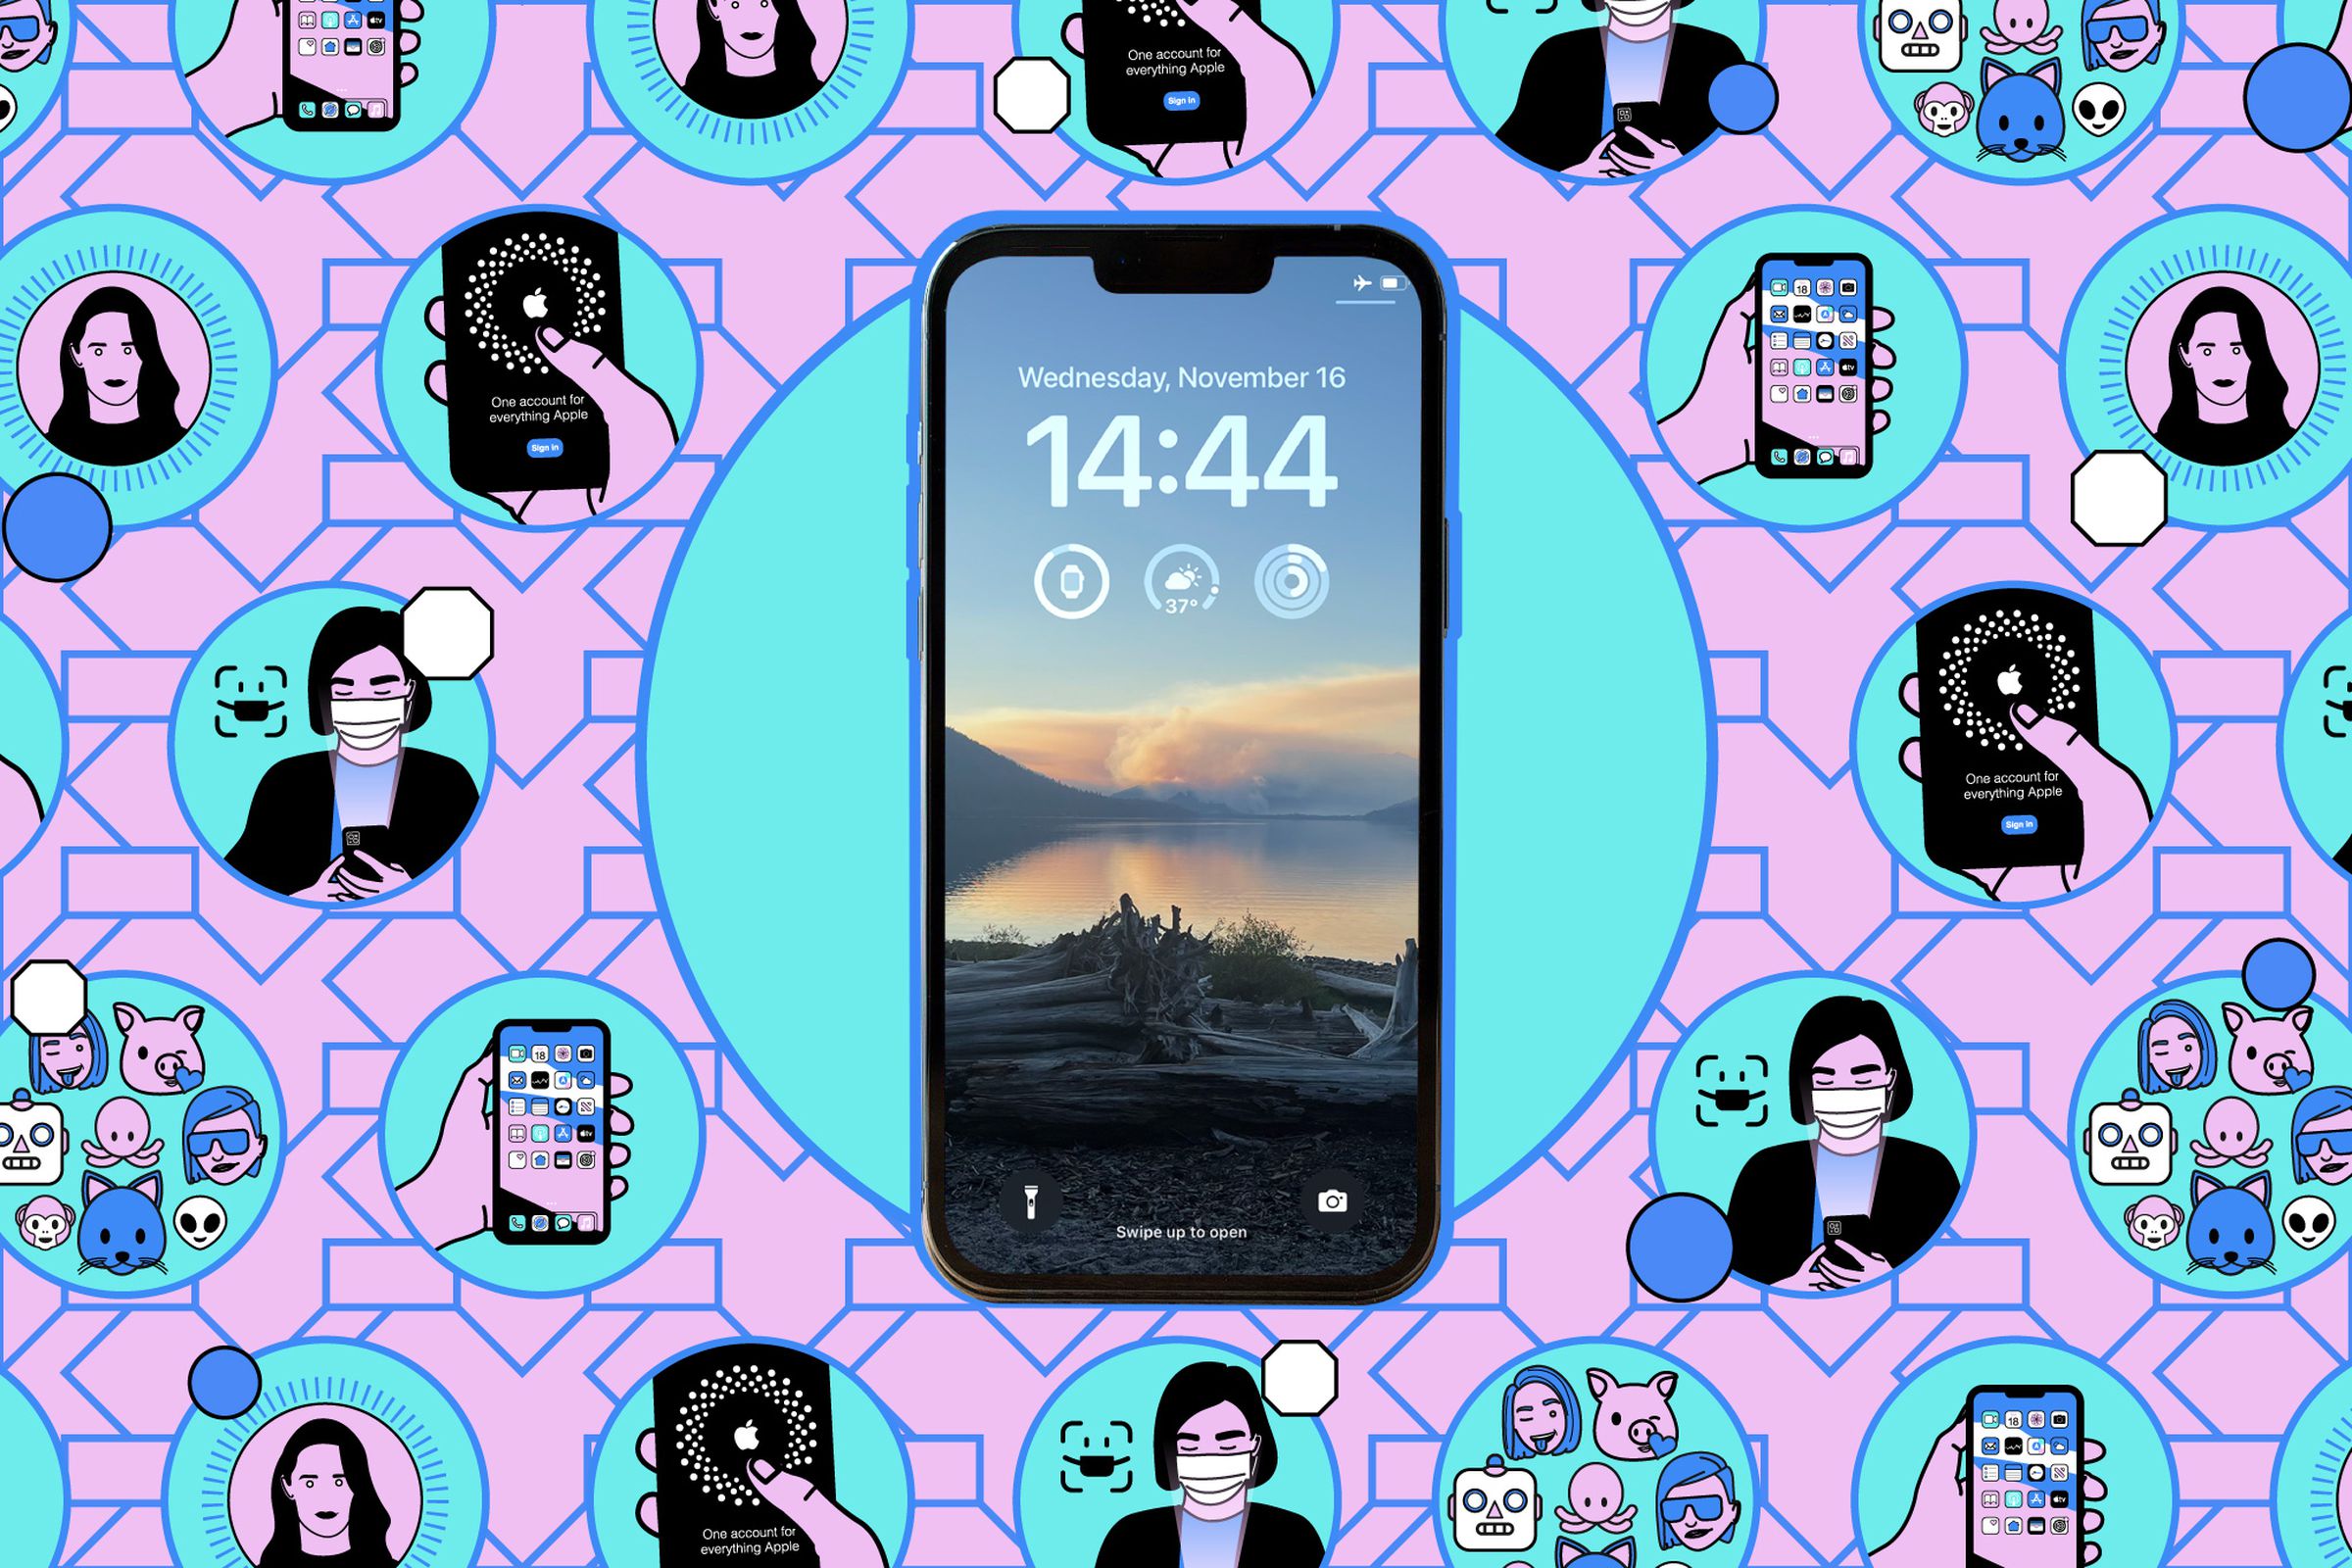 Illustration of an iPhone showing its lockscreen on a pink and blue background.